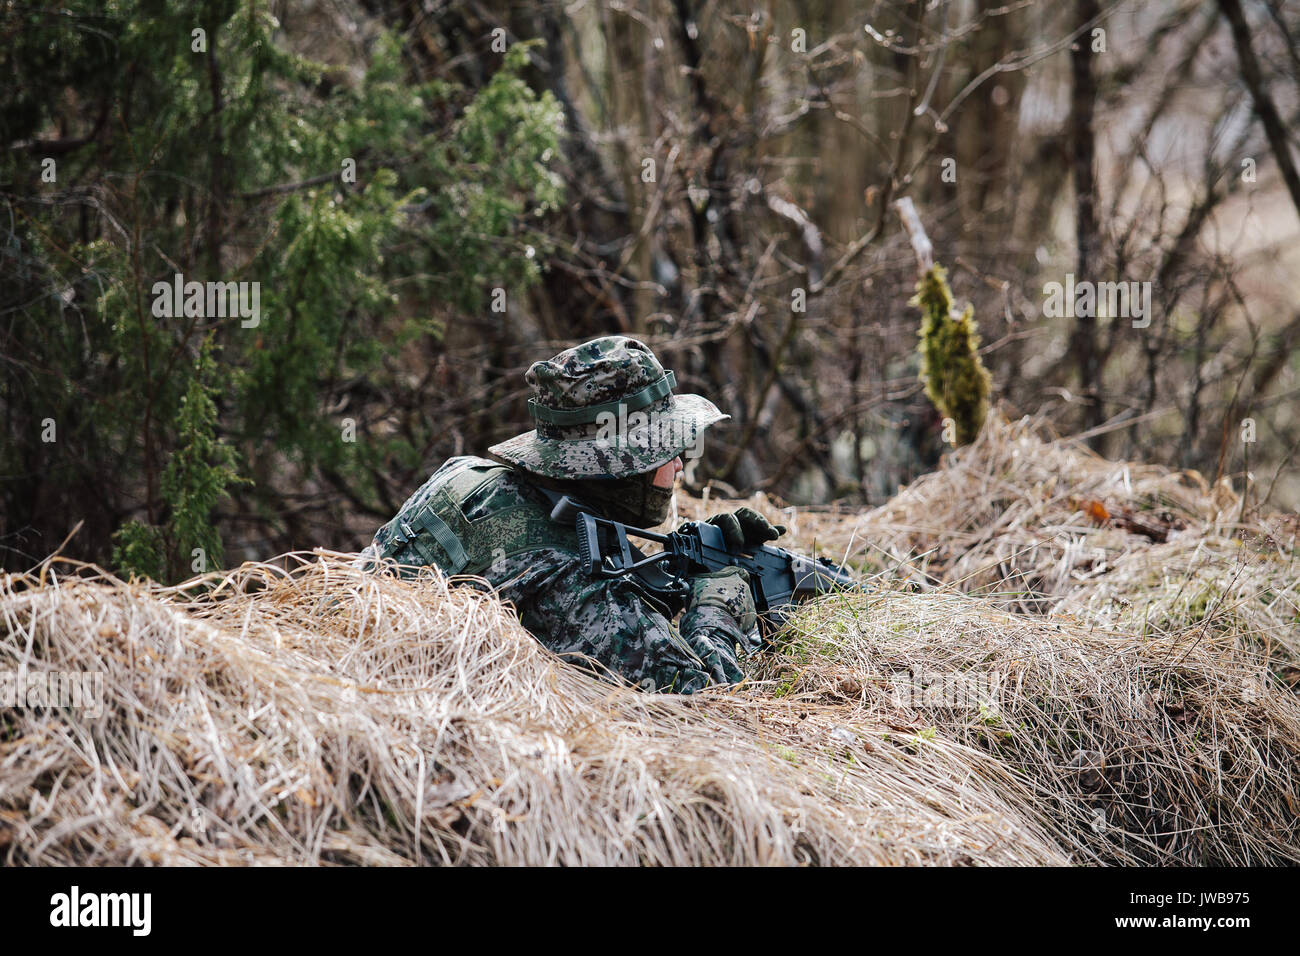 HUMALA, ESTONIA - 09 APR 2016: Soldier in camouflage with weapon protect his position. Military tactical airsoft game. Stock Photo